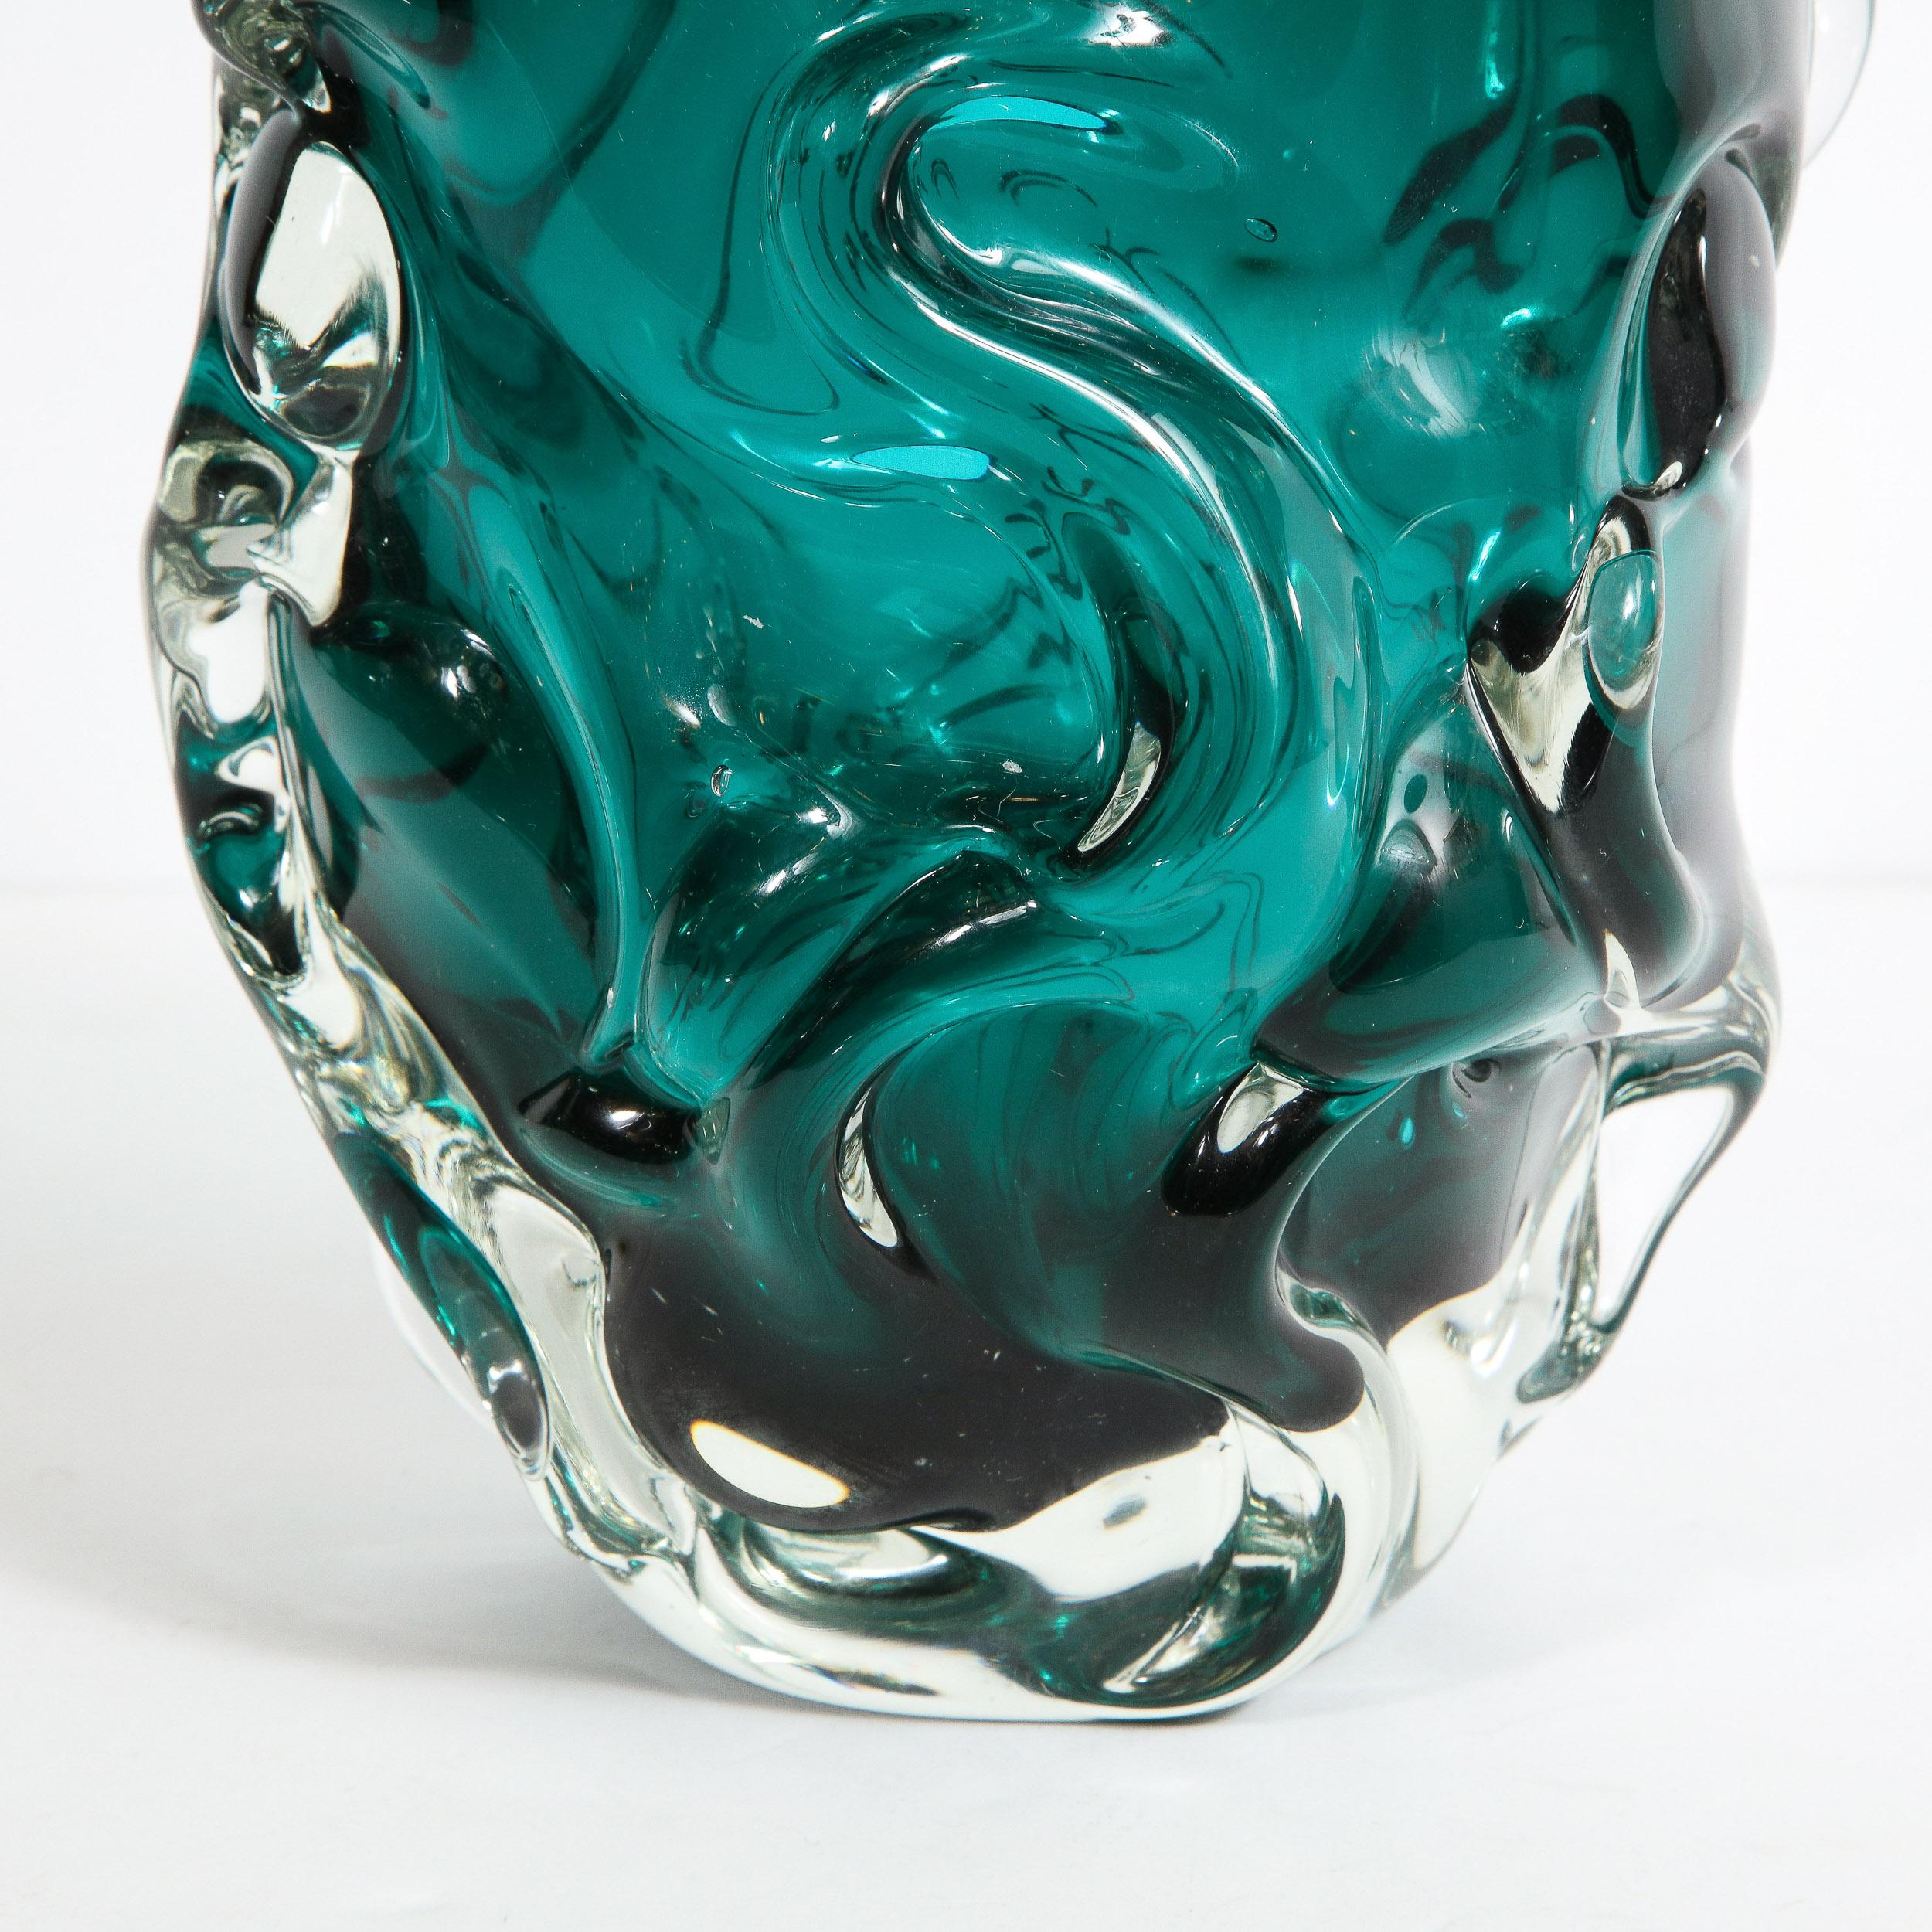 Mid-Century Modern Sculptural Hand Blown Murano Teal and Translucent Glass Vase 2